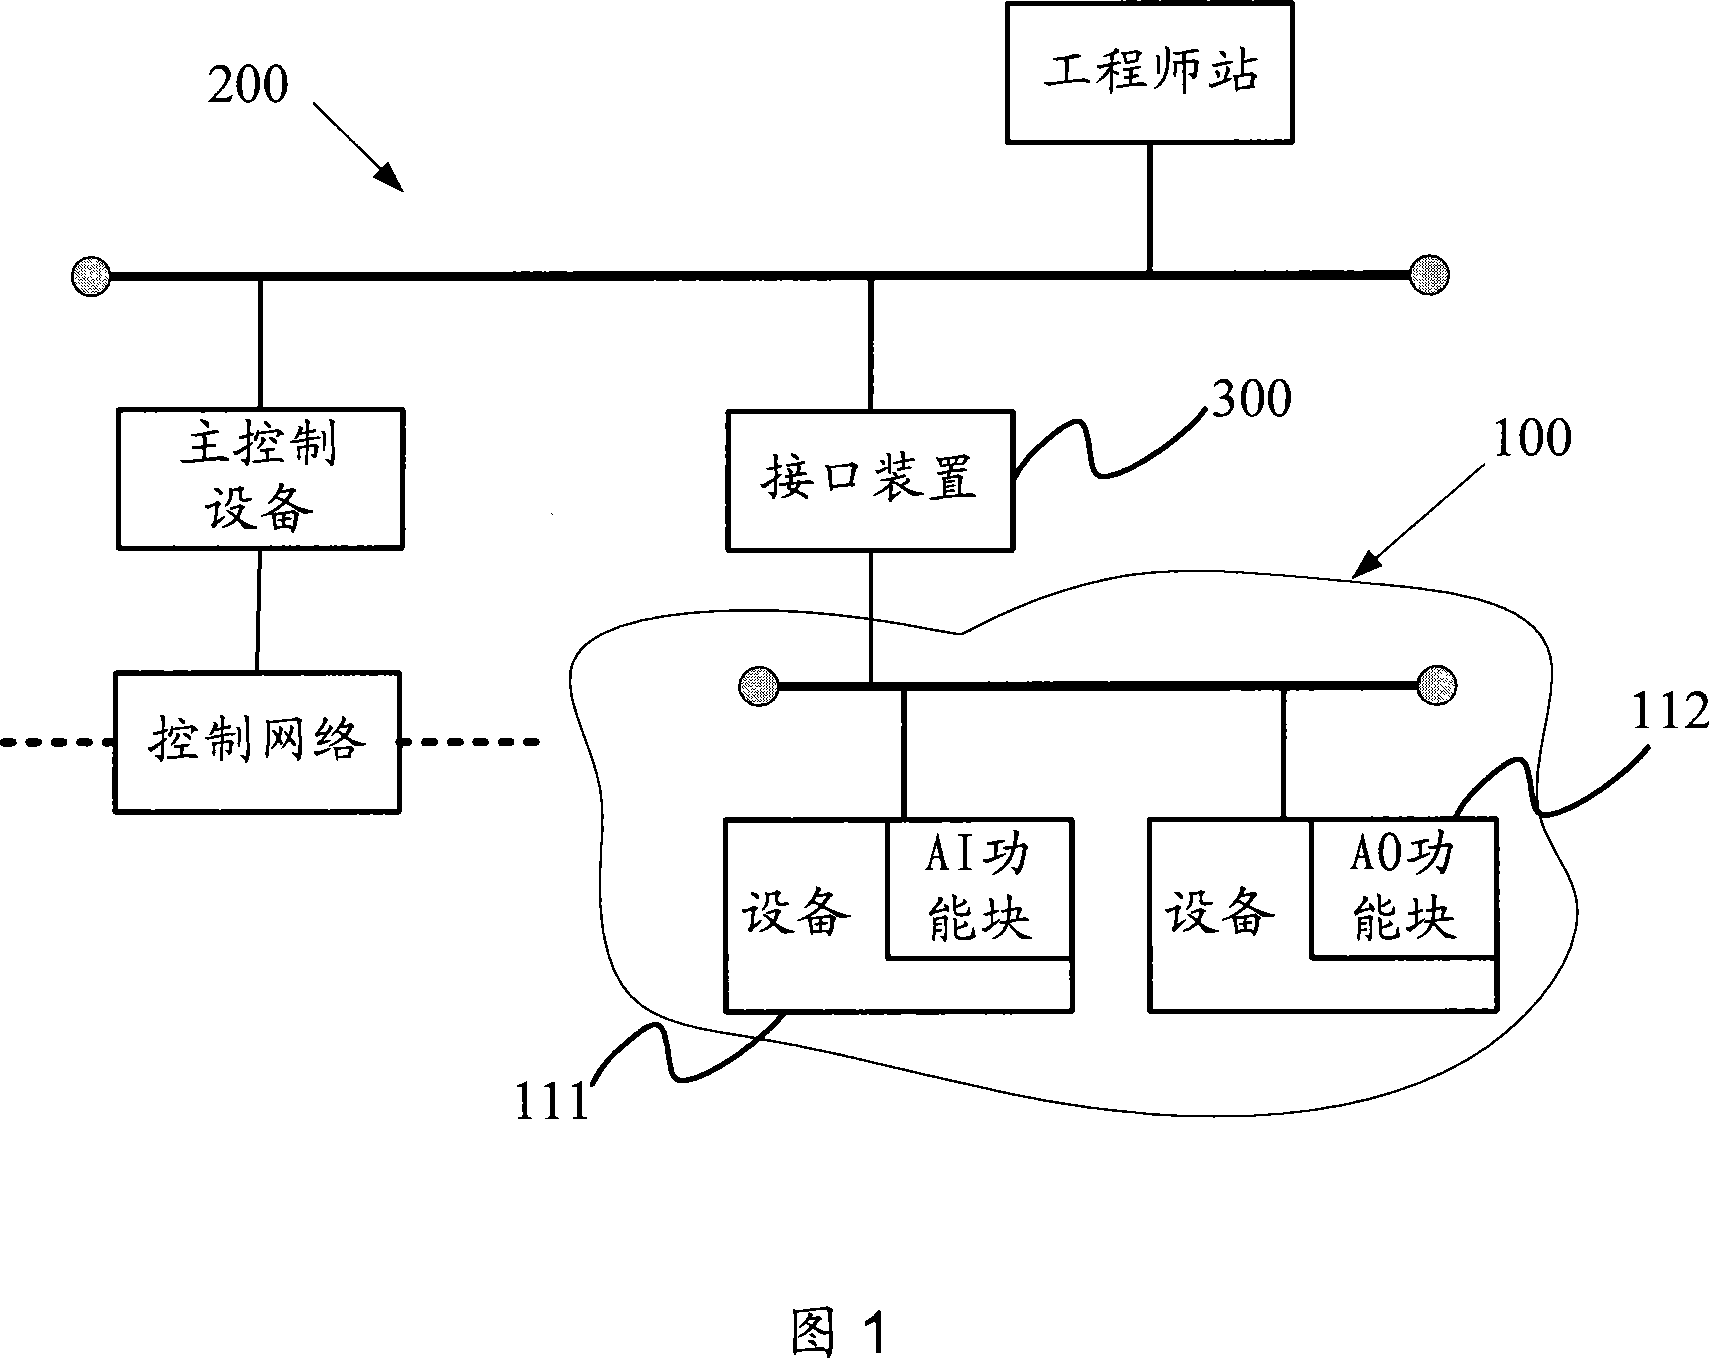 Control system including FF protocol H1 network segment and interface arrangement and communication method